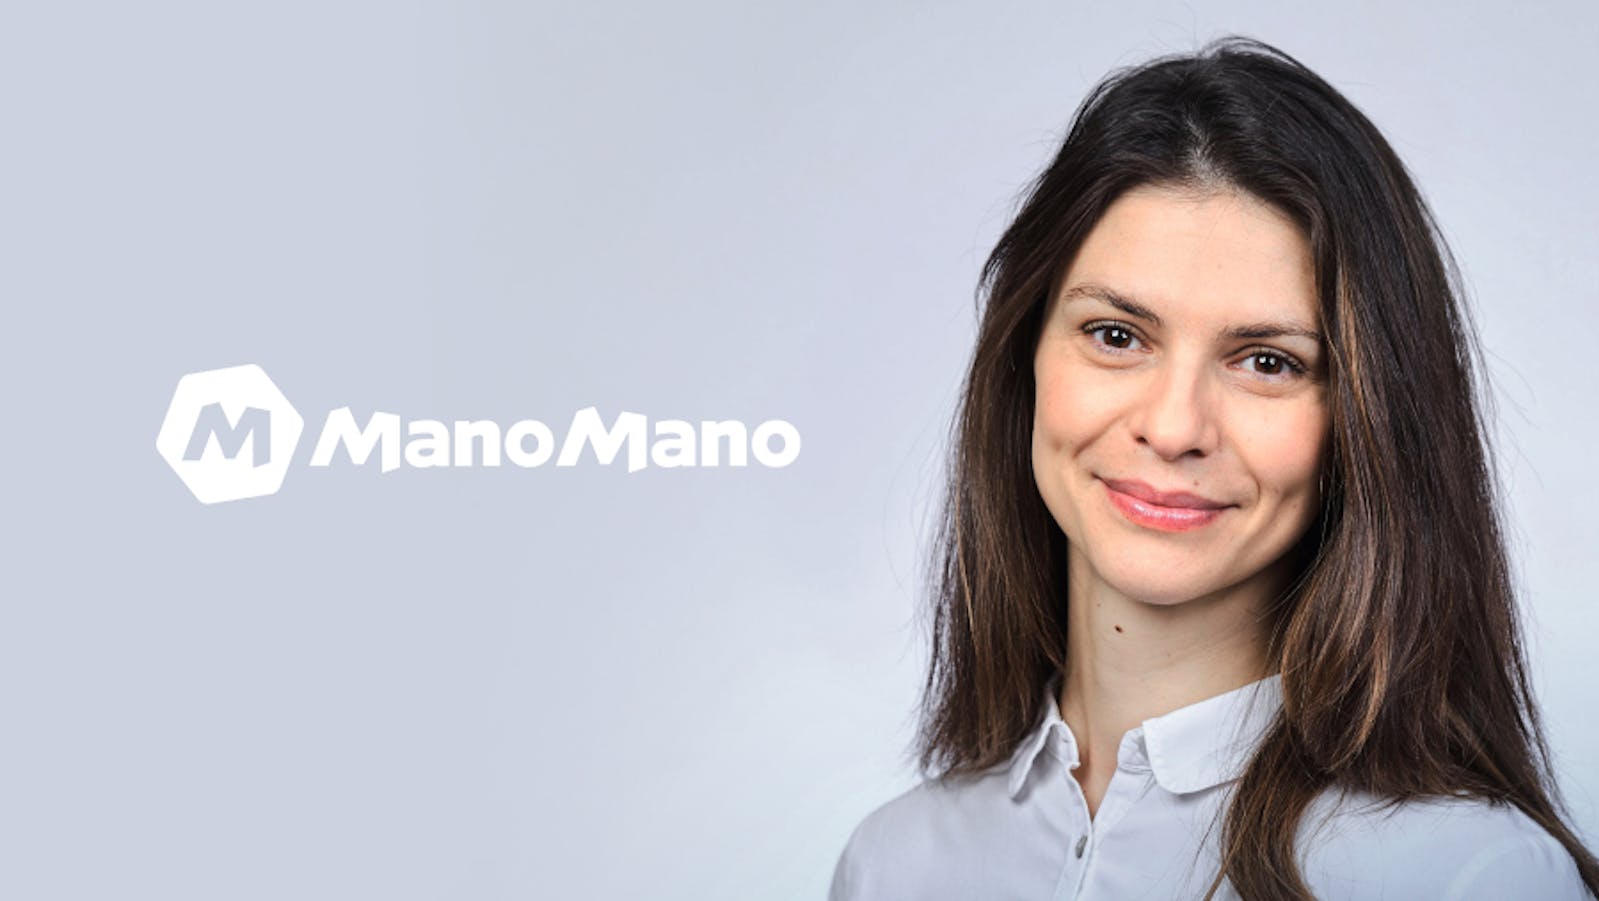  Featured image: Leading DIY, home, & gardening marketplace, ManoMano pioneered the use of an online community of product experts to support its CX strategy. - Read full post: ManoMano: How to Put Human Connection at the Core of Digital CX